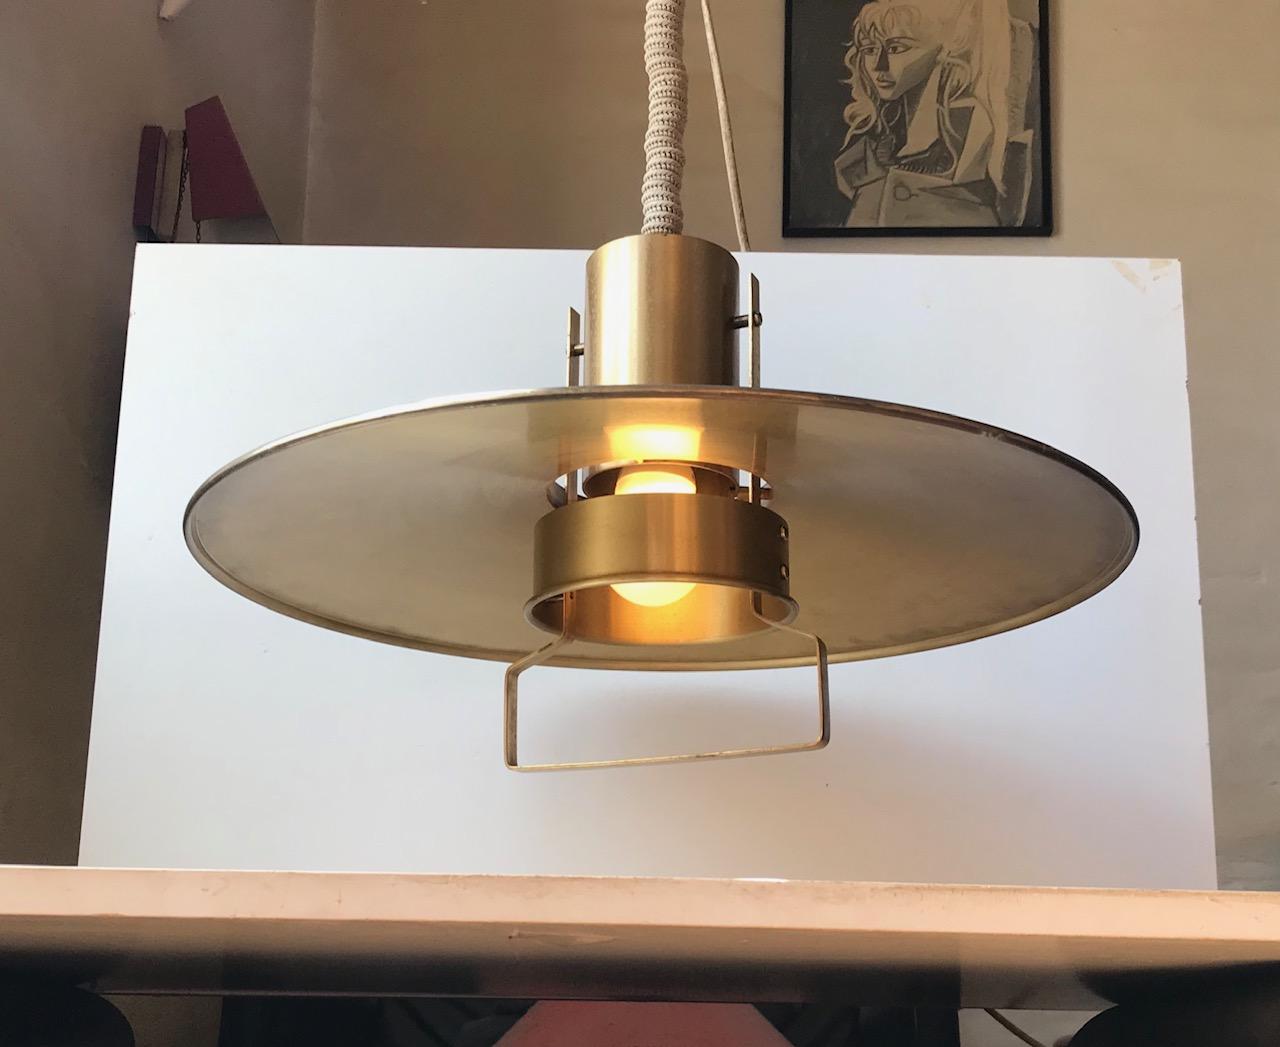 Beatifully and steady made mid-century pendant ceiling lamp by Vitrika in Denmark. The style is Nautical/Maritime and it will add a cosy twist to any modern interior. The light is in a very nice vintage condition with light ware and natural